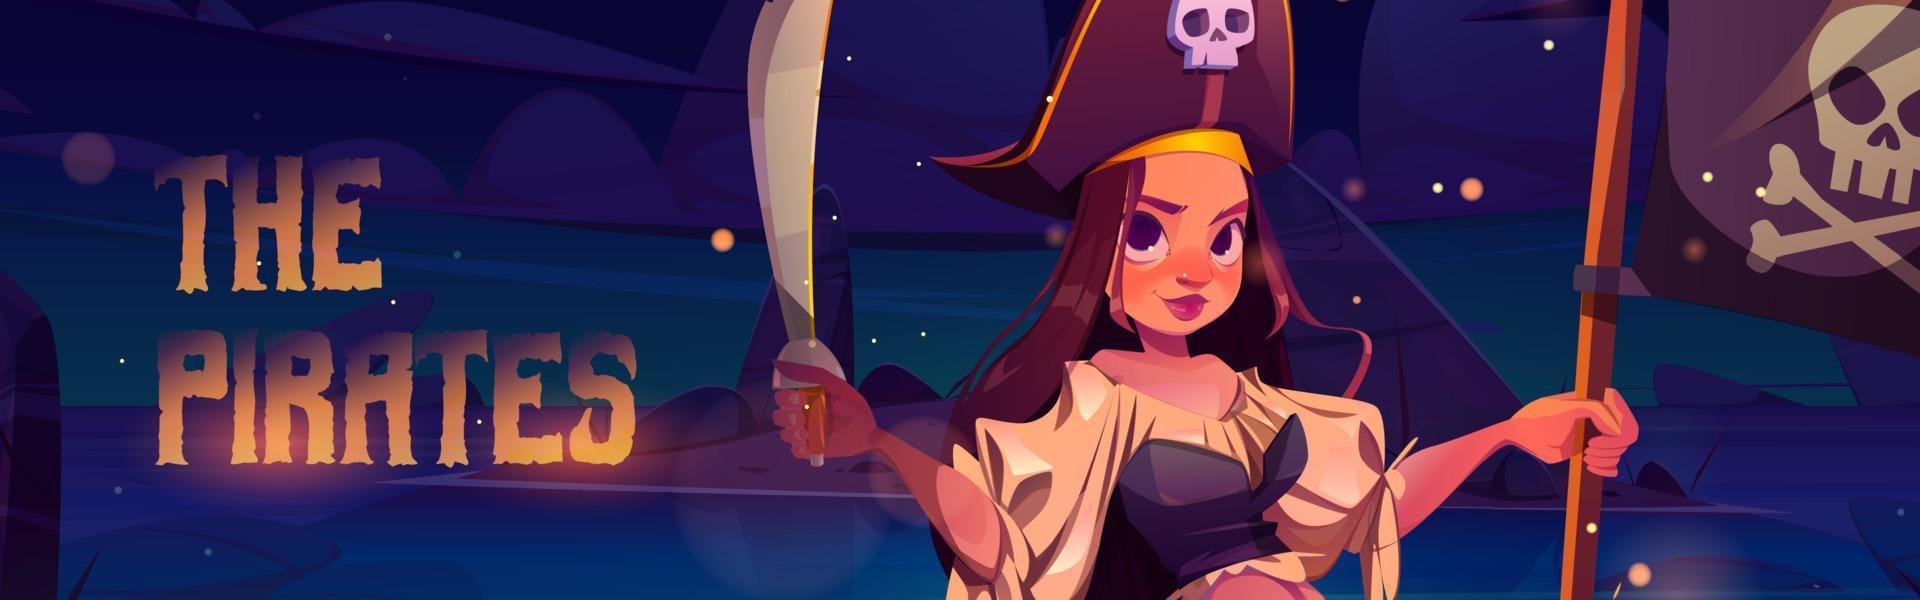 Girl pirate with sword and black flag with skull vector